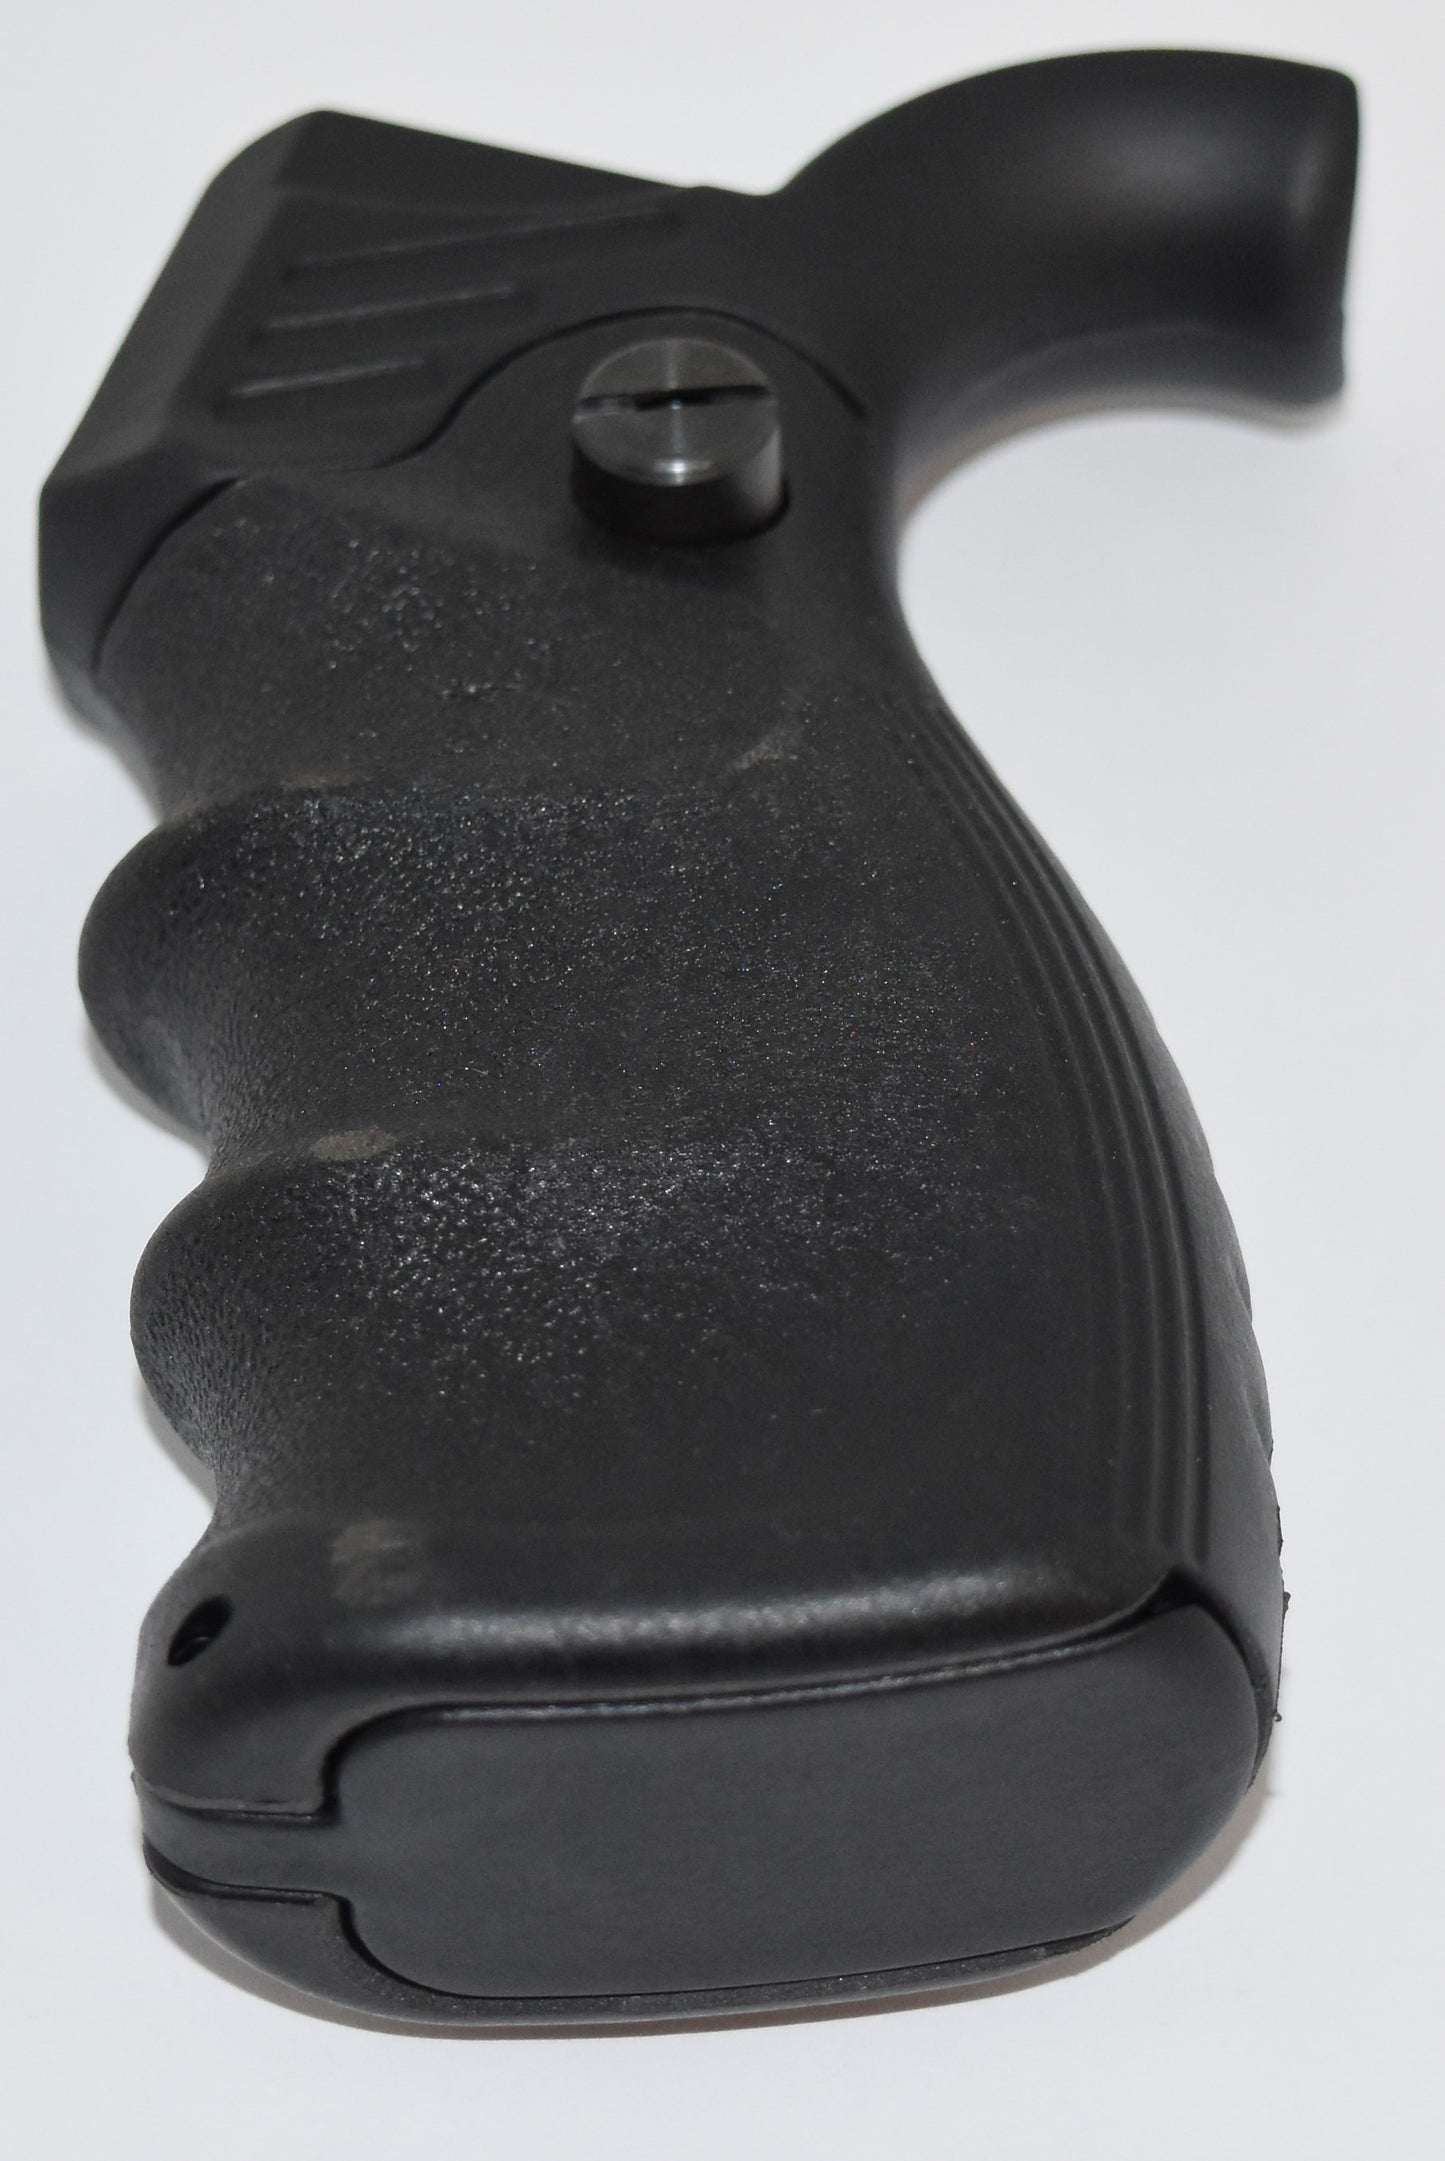 Carbon Express Crossbow Replacement Folding Hand Grip